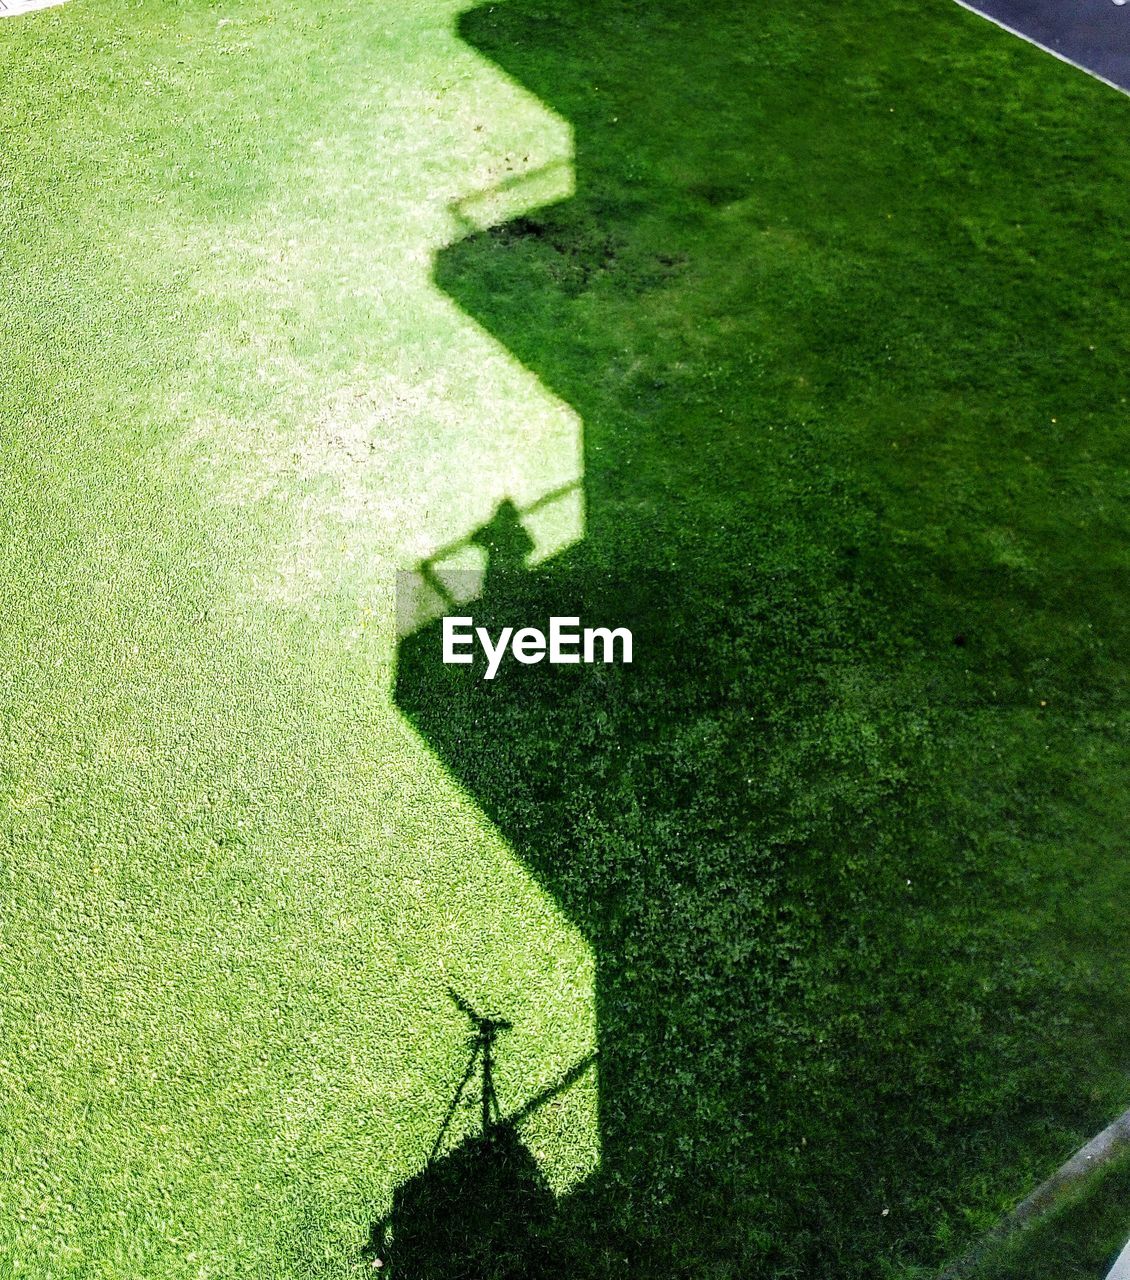 SHADOW OF PERSON ON GRASS